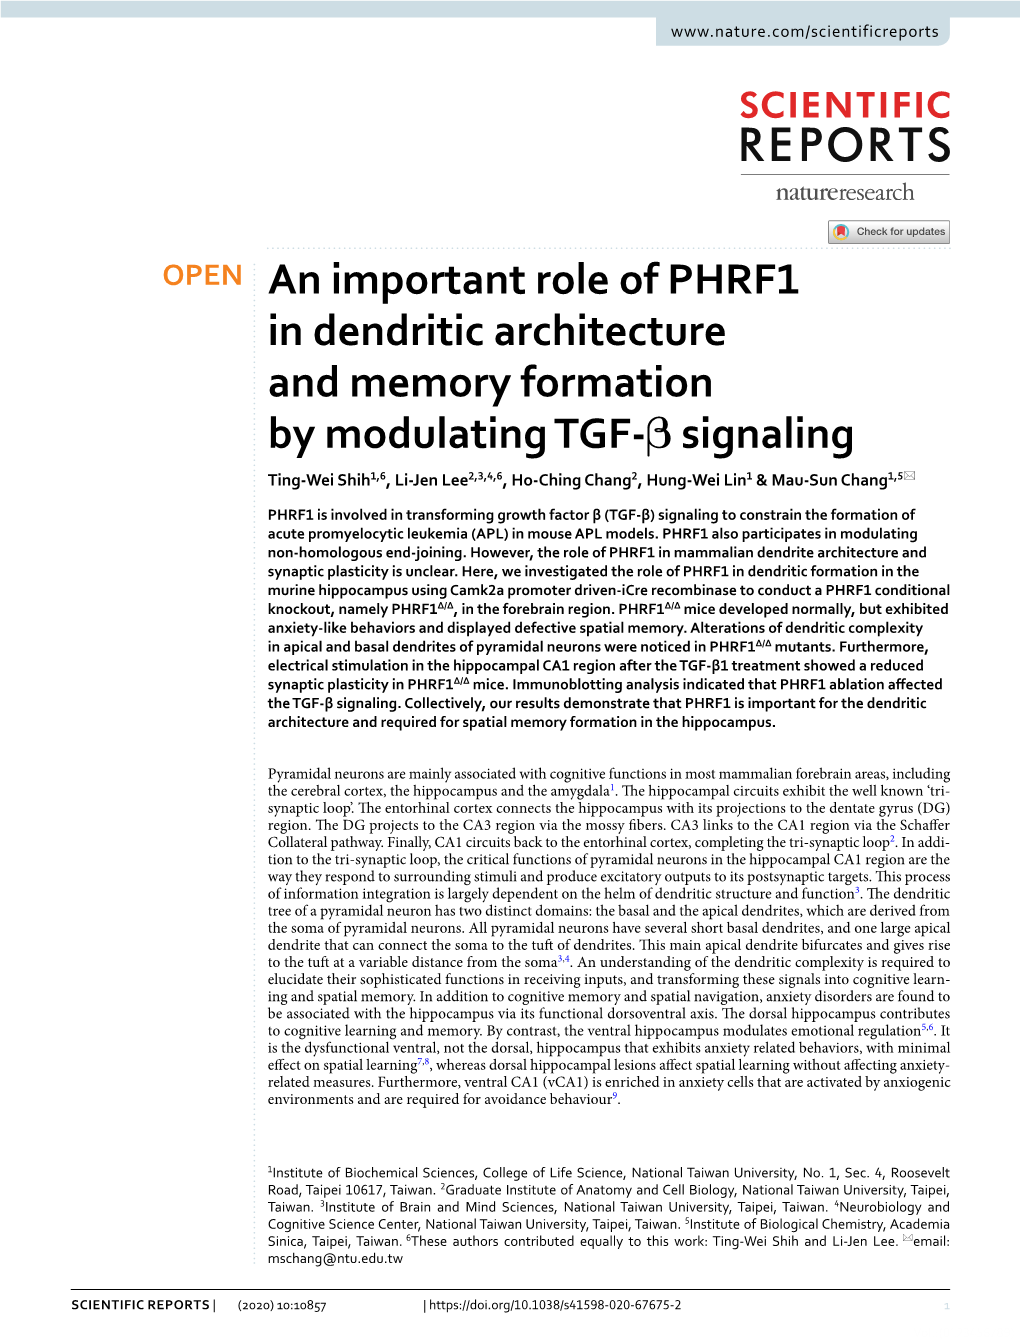 An Important Role of PHRF1 in Dendritic Architecture and Memory